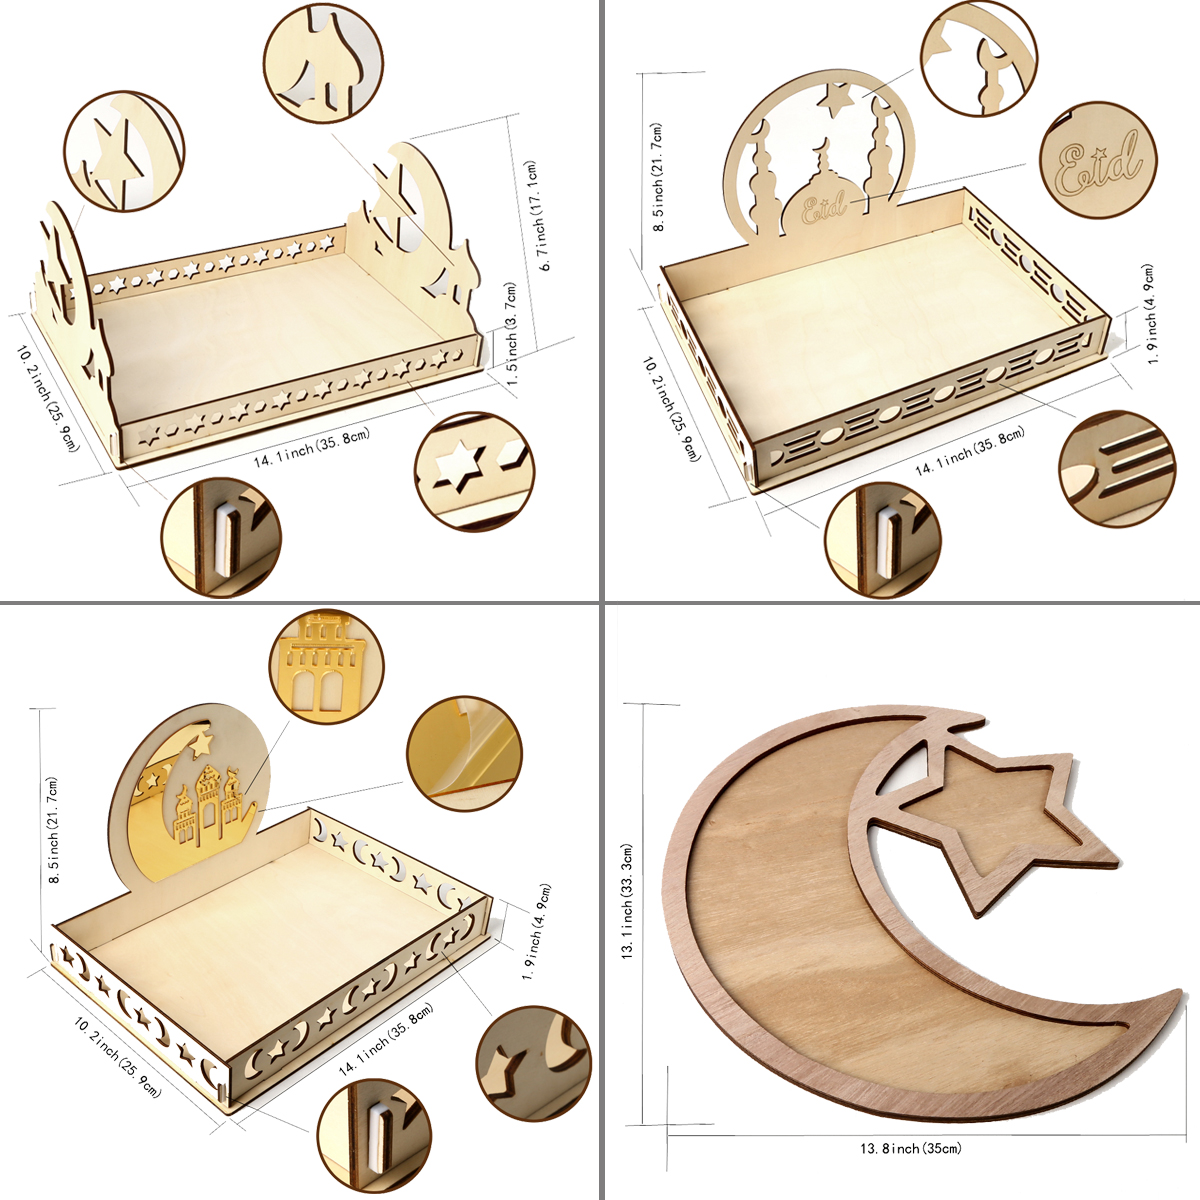 Rustic-Wooden-Islam-Ramadan-Food-Serving-Tray-Pastry-Dinner-Plates-Holder-Decorations-1453425-3